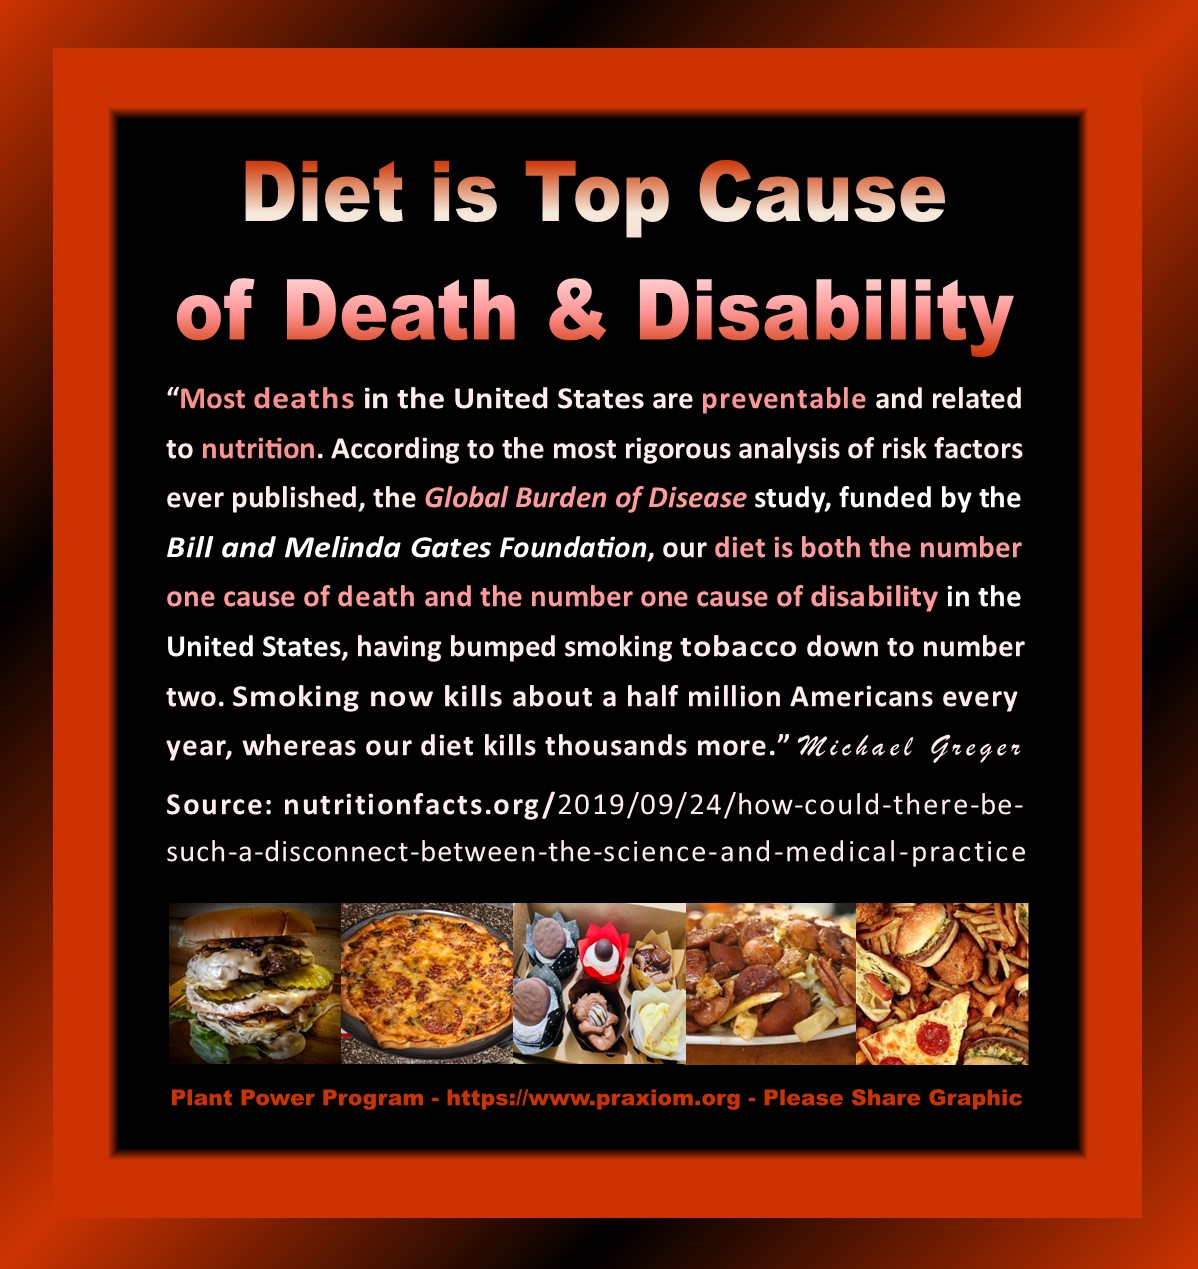 Diet is The Top Cause of Death and Disability in the United States - Dr. Michael Greger